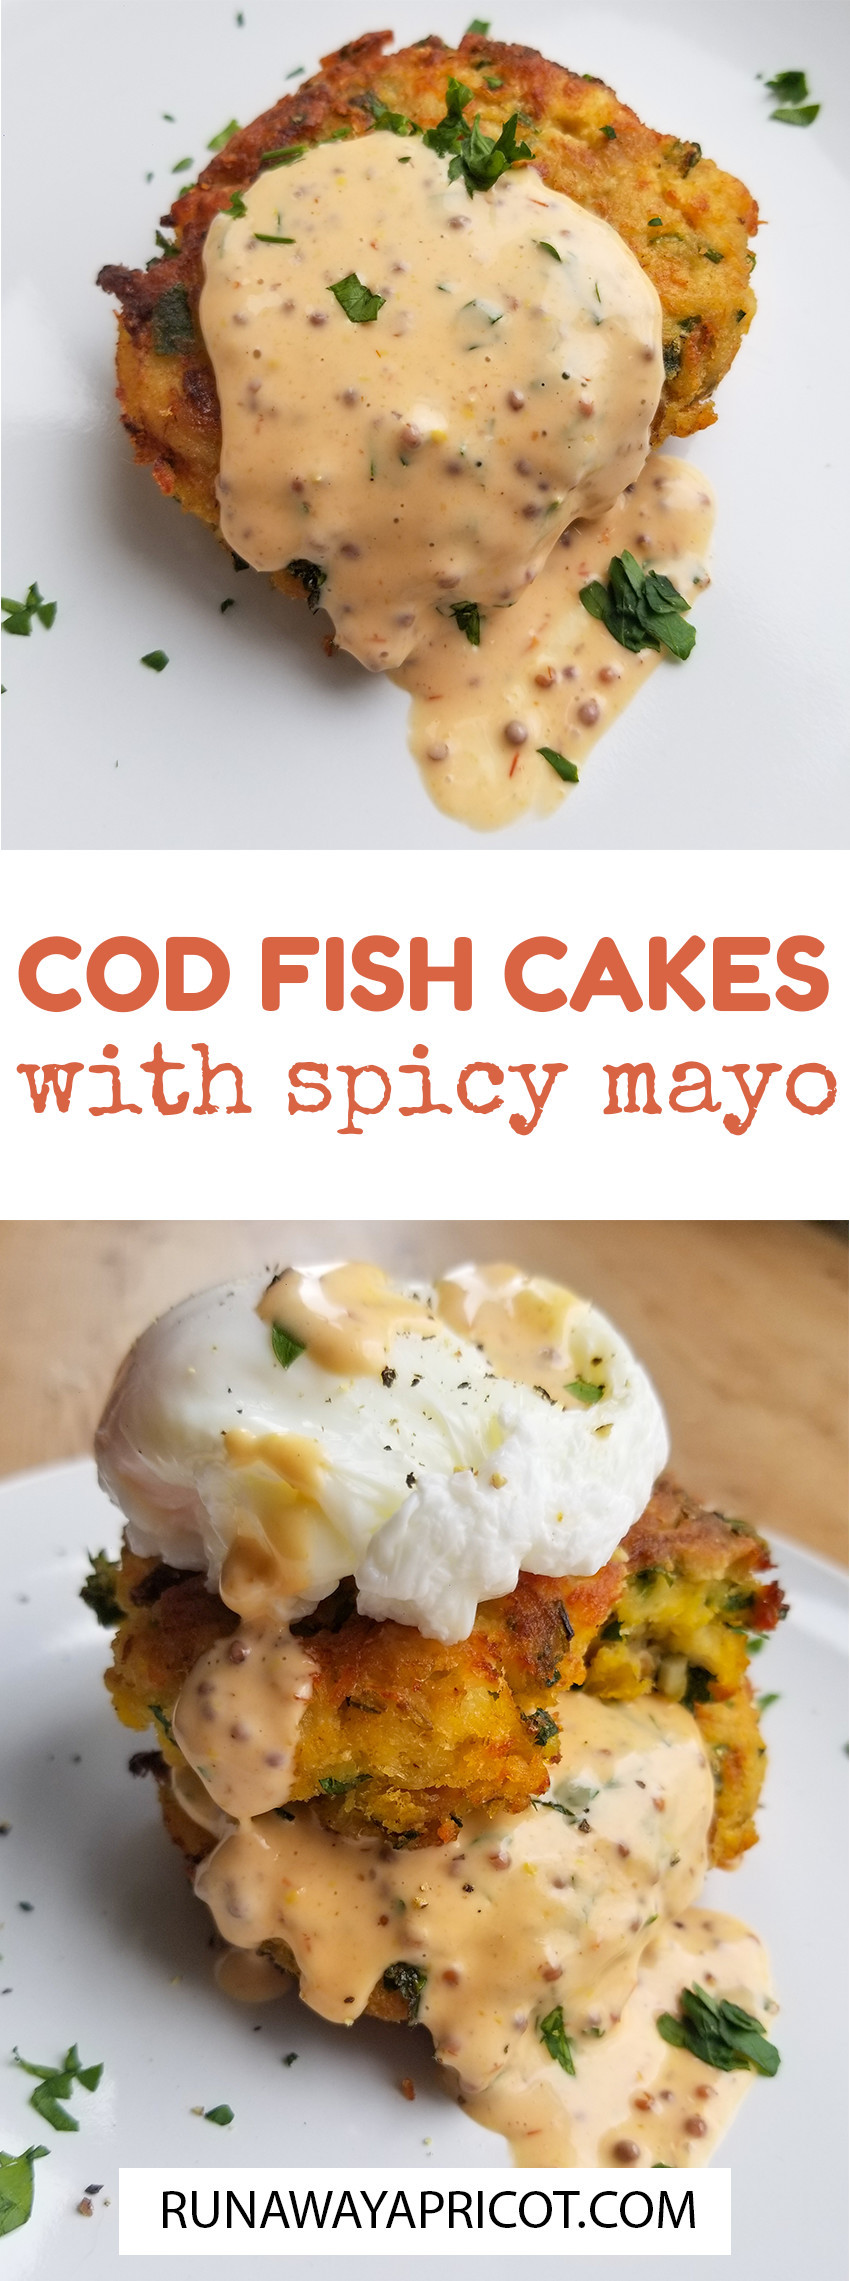 Cod Fish Cake Recipe
 Cod Fish Cakes with Spicy Mayo – A New Easter Tradition